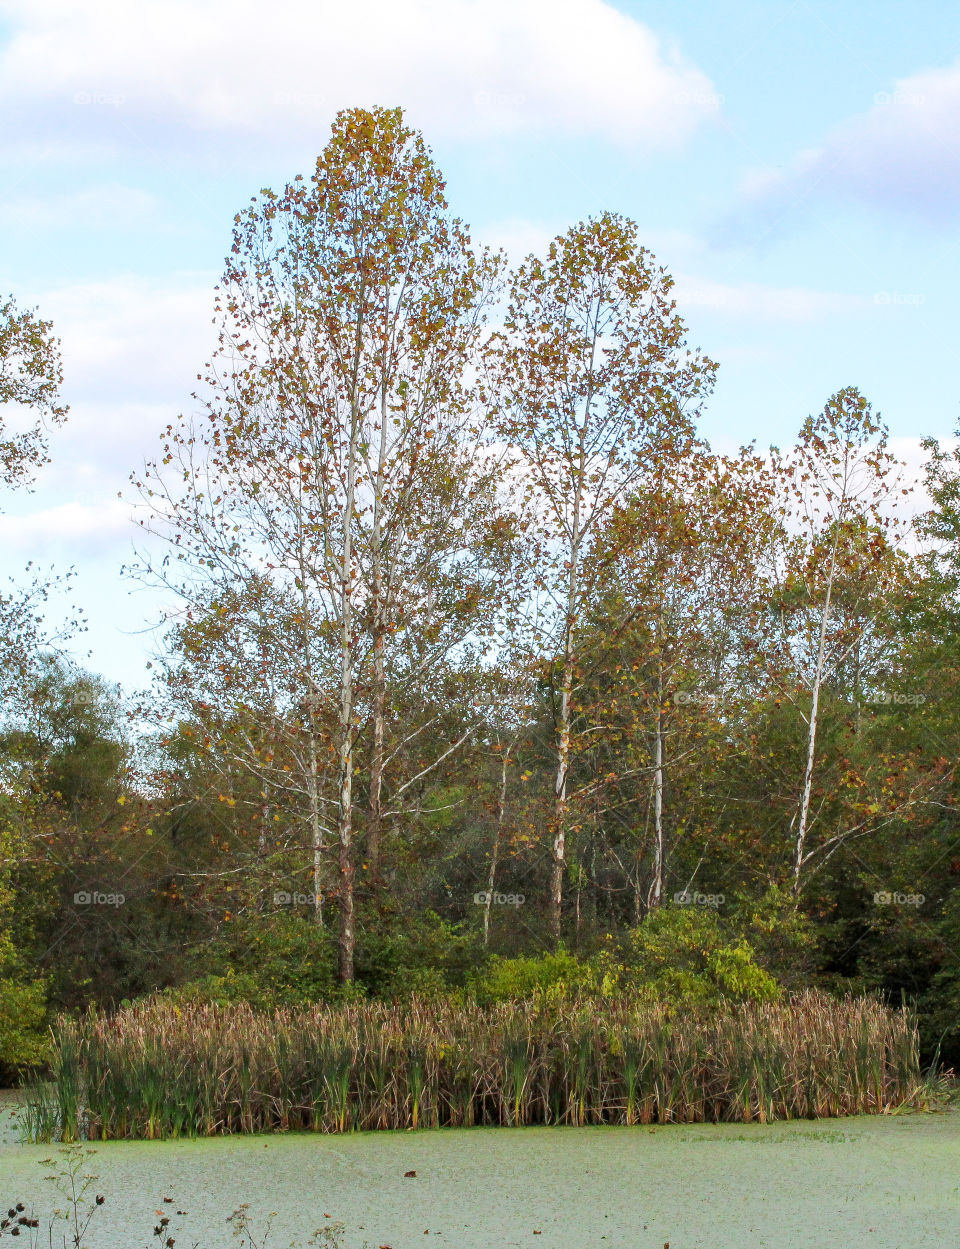 Fall trees across a stagnant pond with cattails